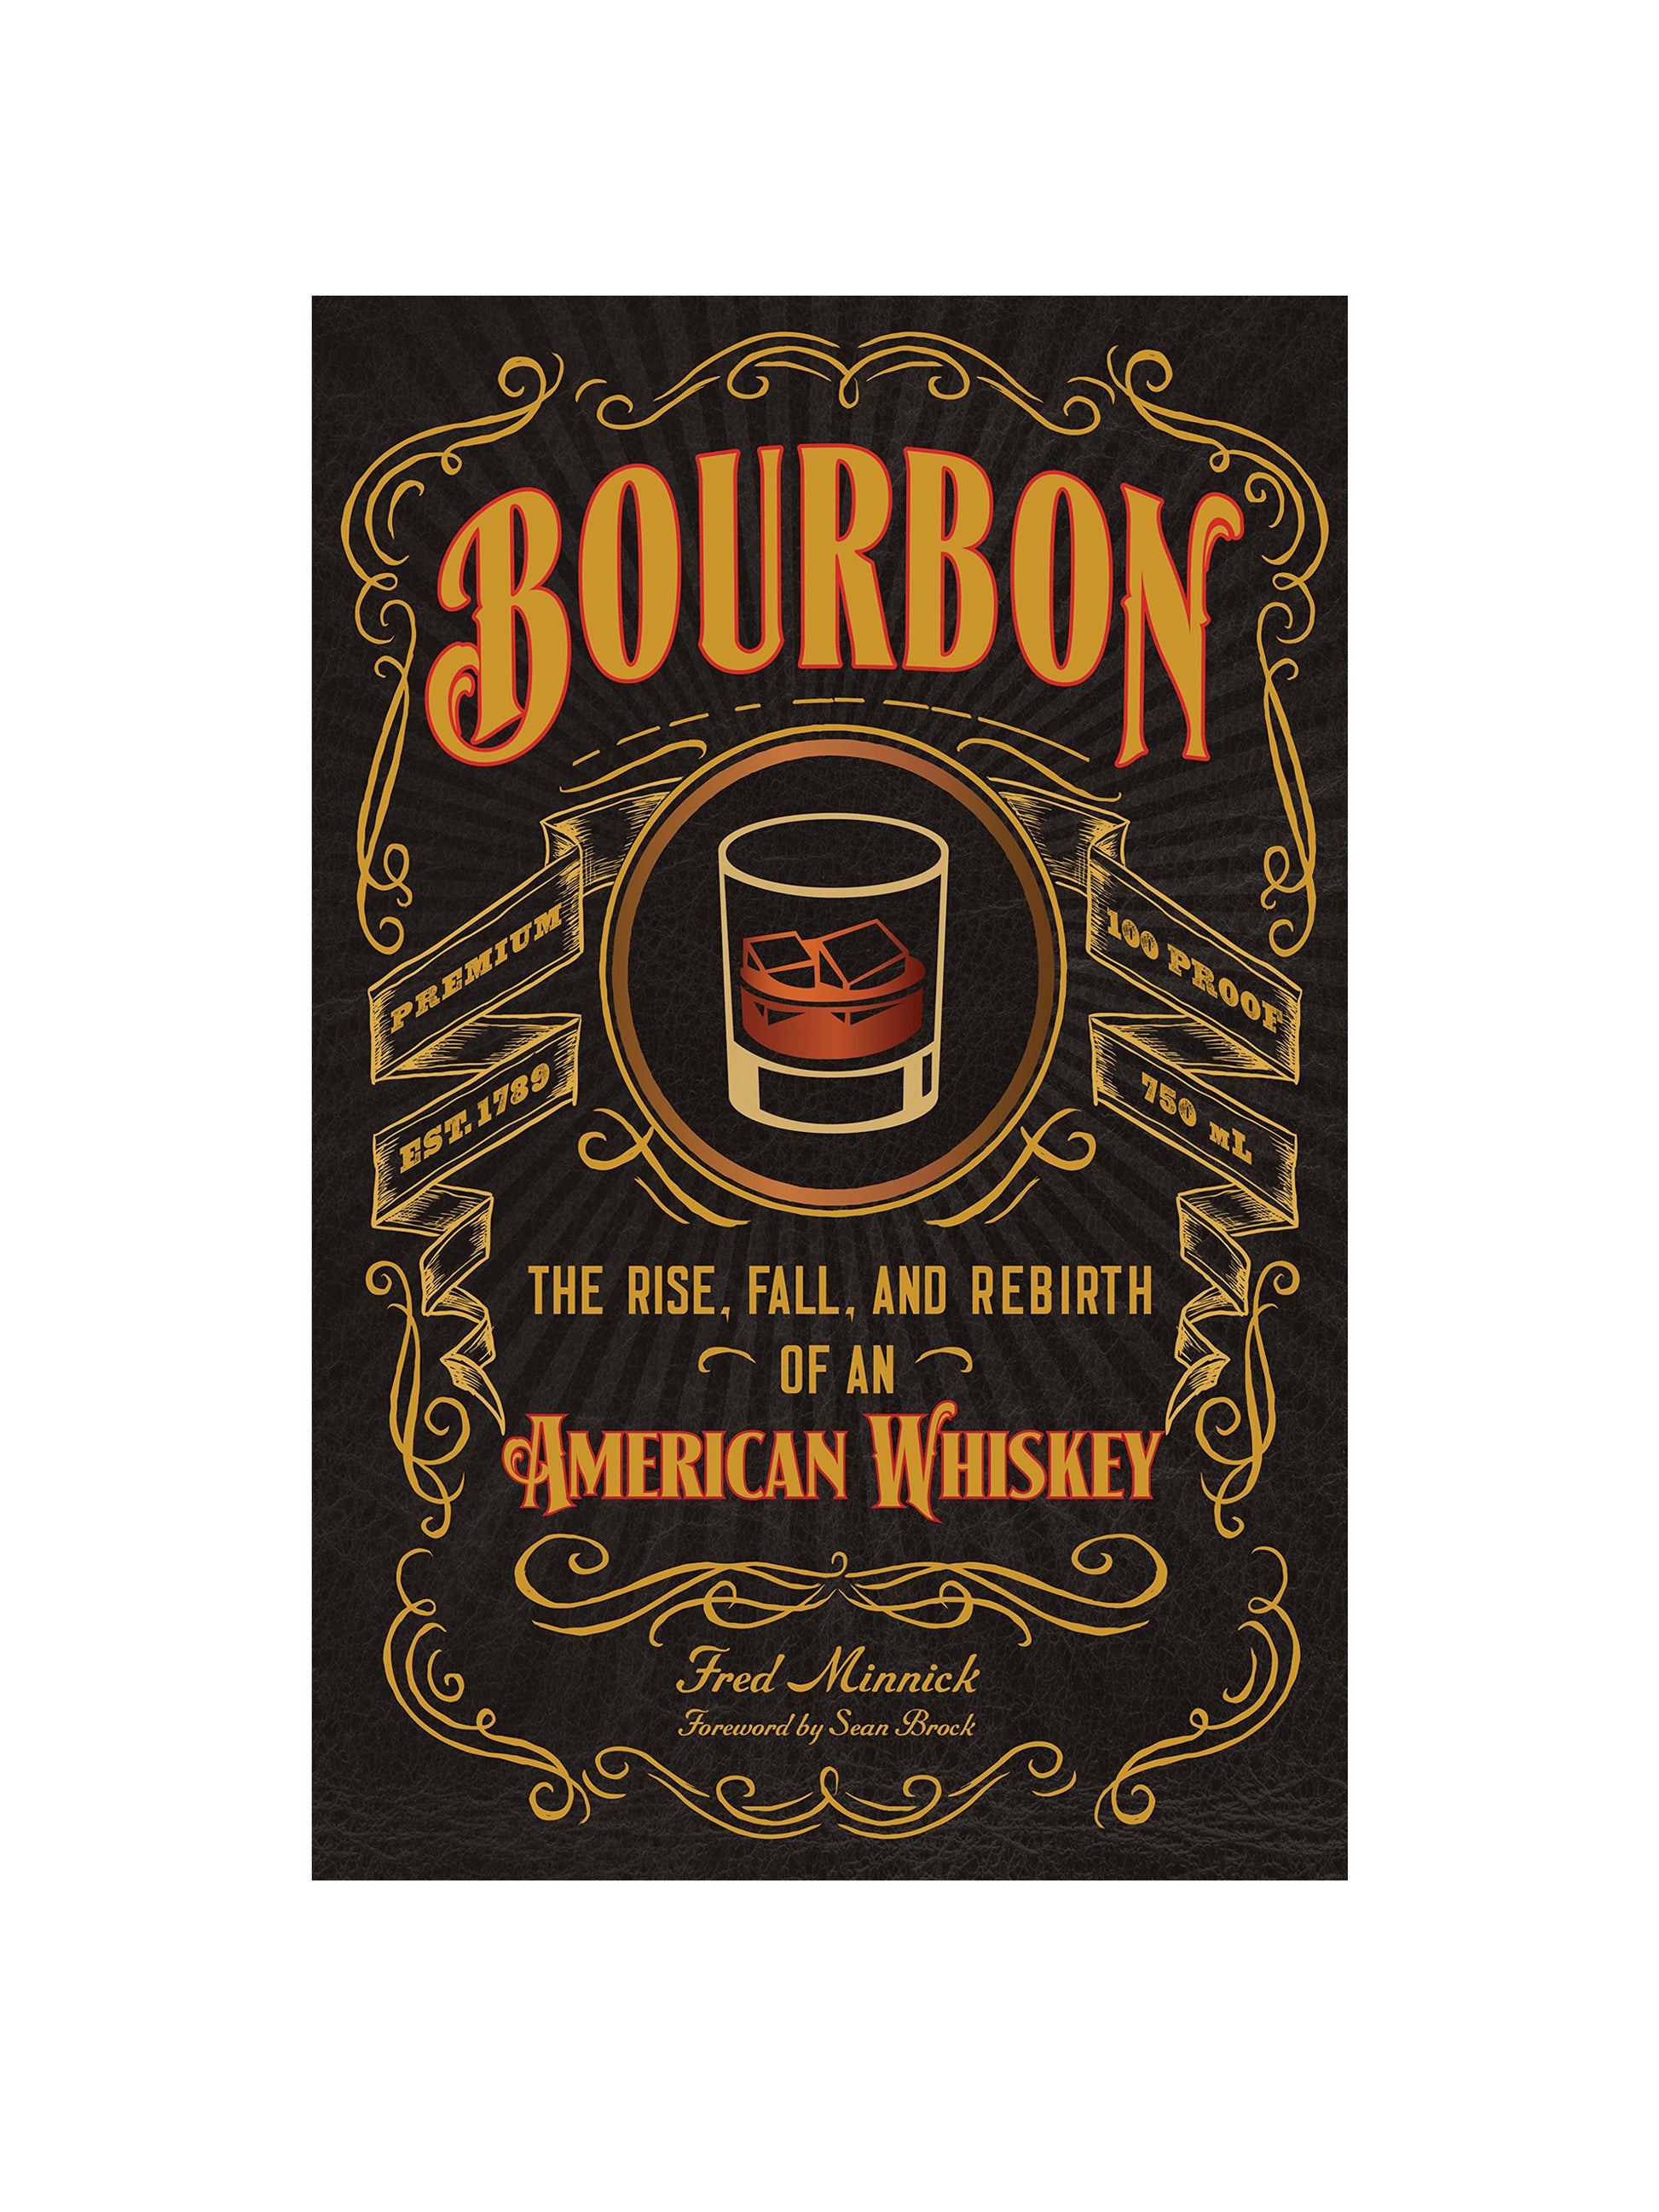 Bourbon: The Rise, Fall, and Rebirth of an American Whiskey Weston Table